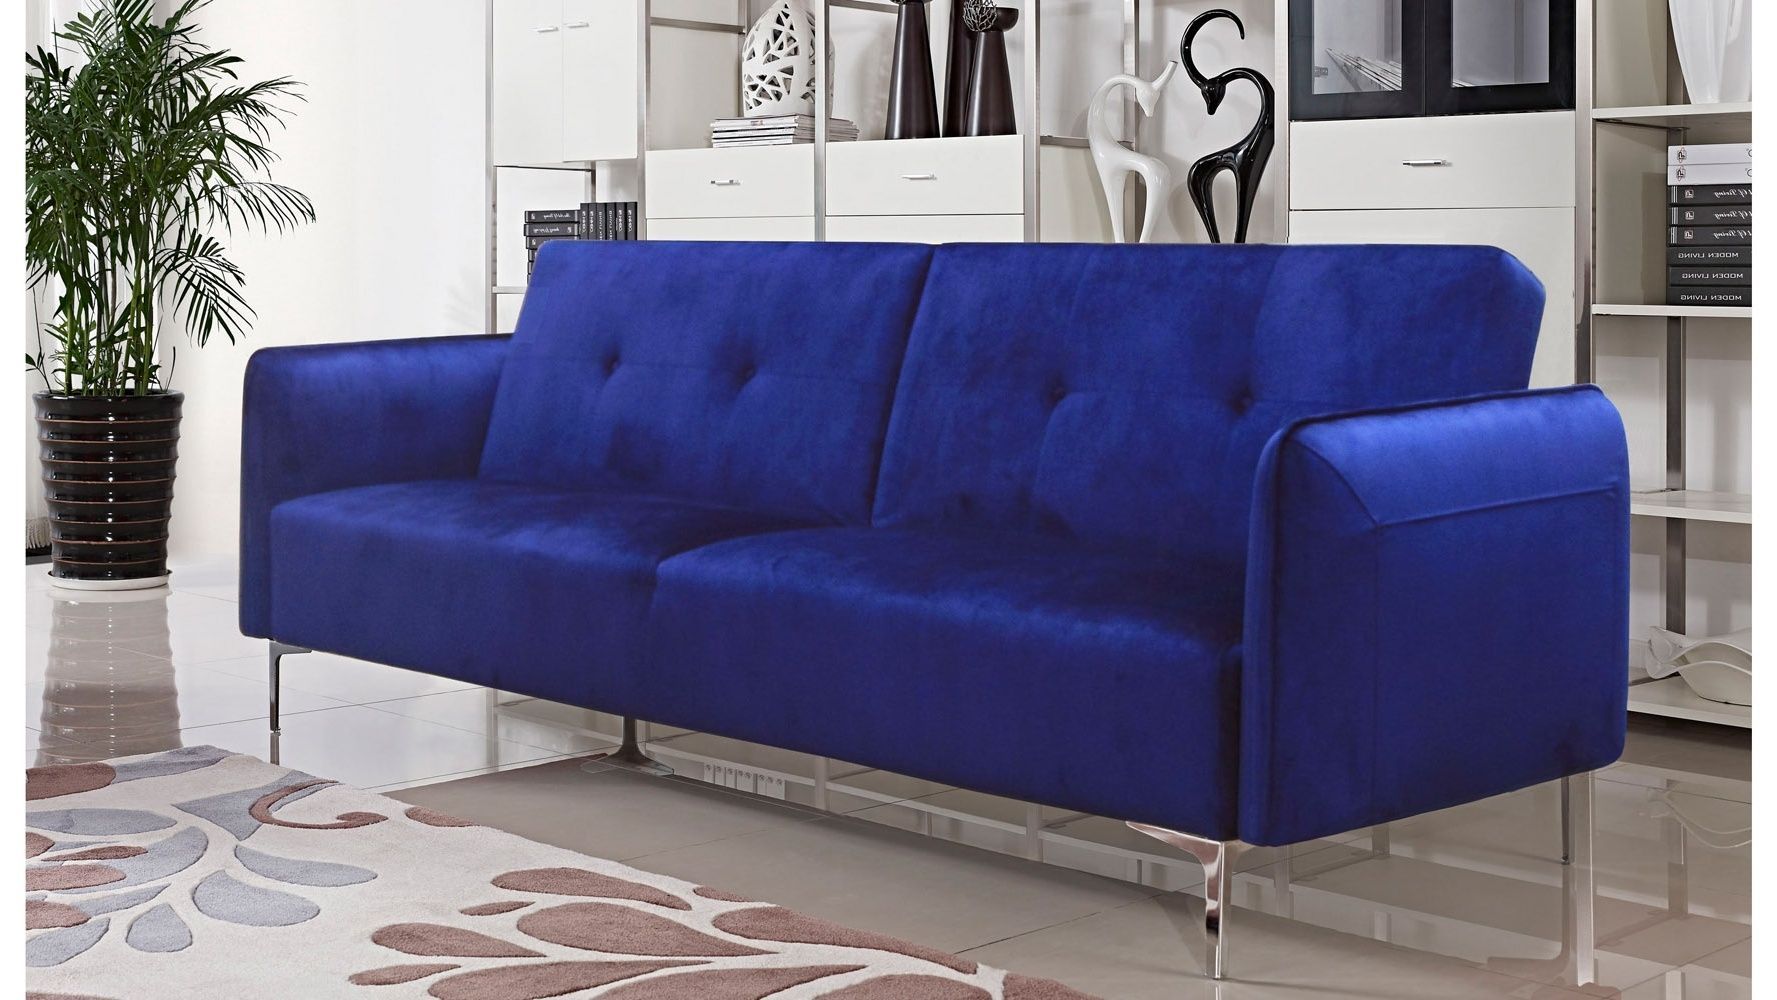 Cobalt Blue Couch | Blue Couches, Couch, Home Throughout Cobalt Console Tables (View 19 of 20)